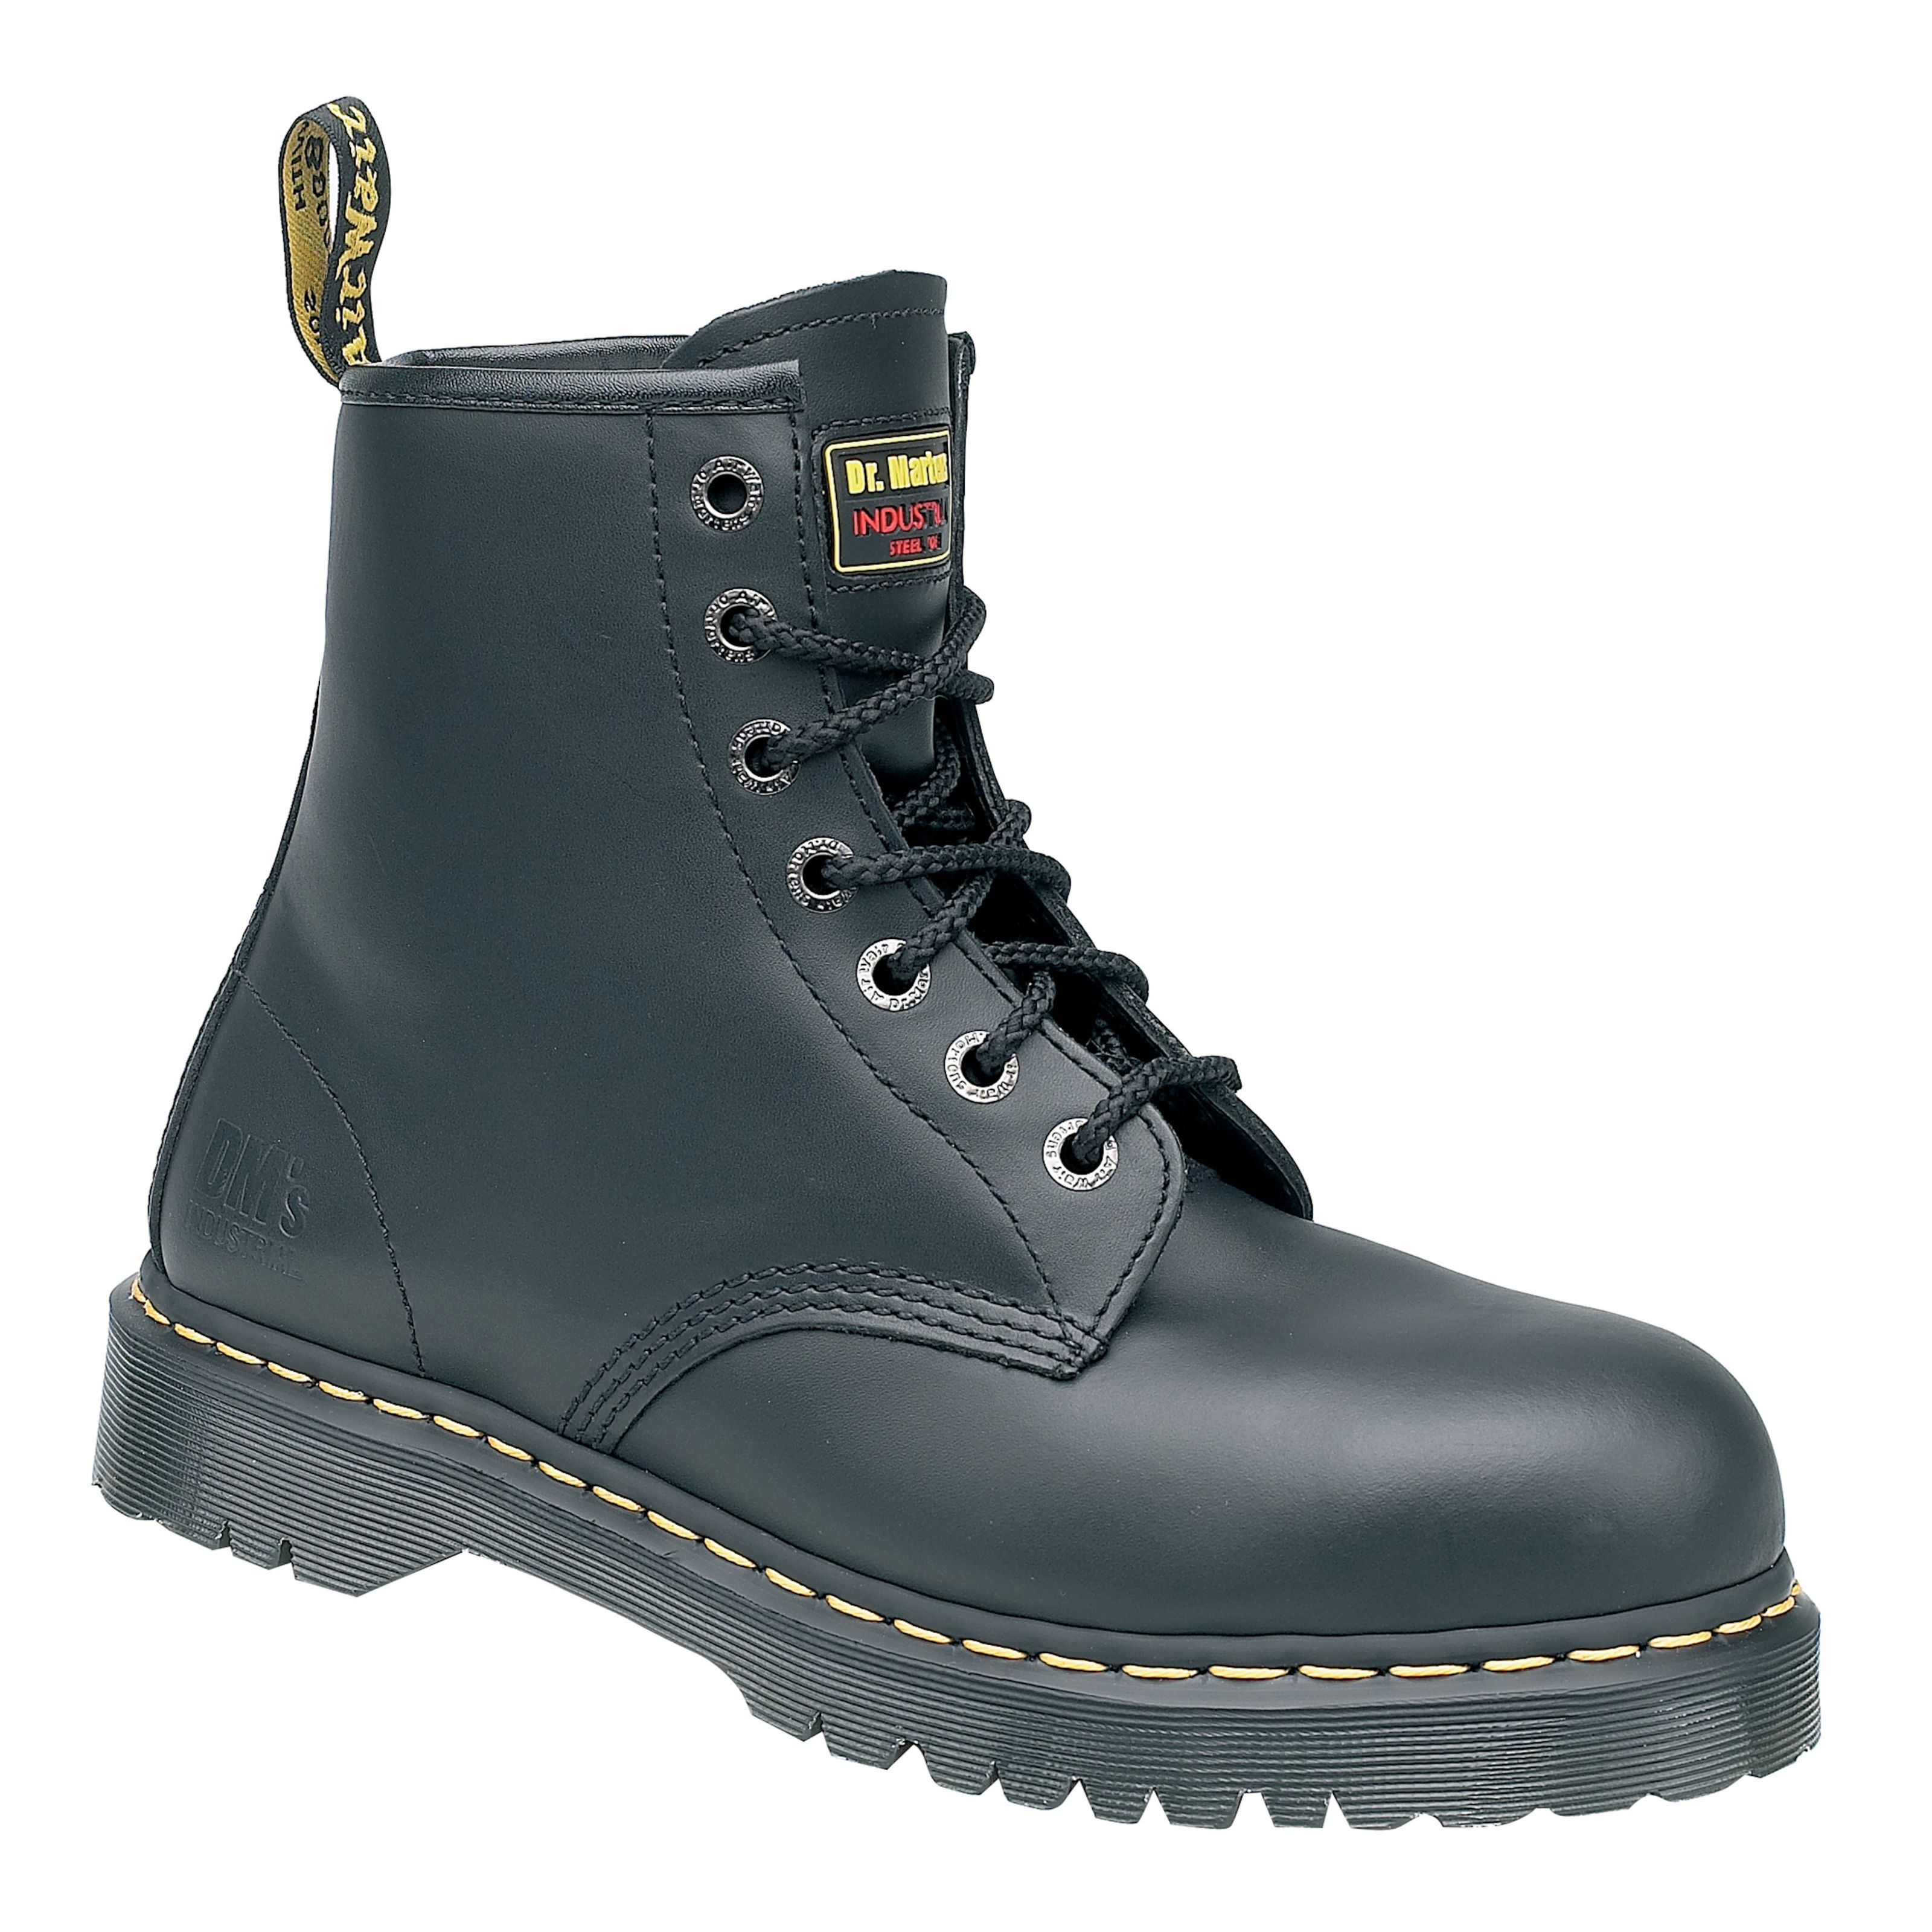 Dr. Martens Icon Black Leather 7 Eye Steel Toe Cap Safety Boots